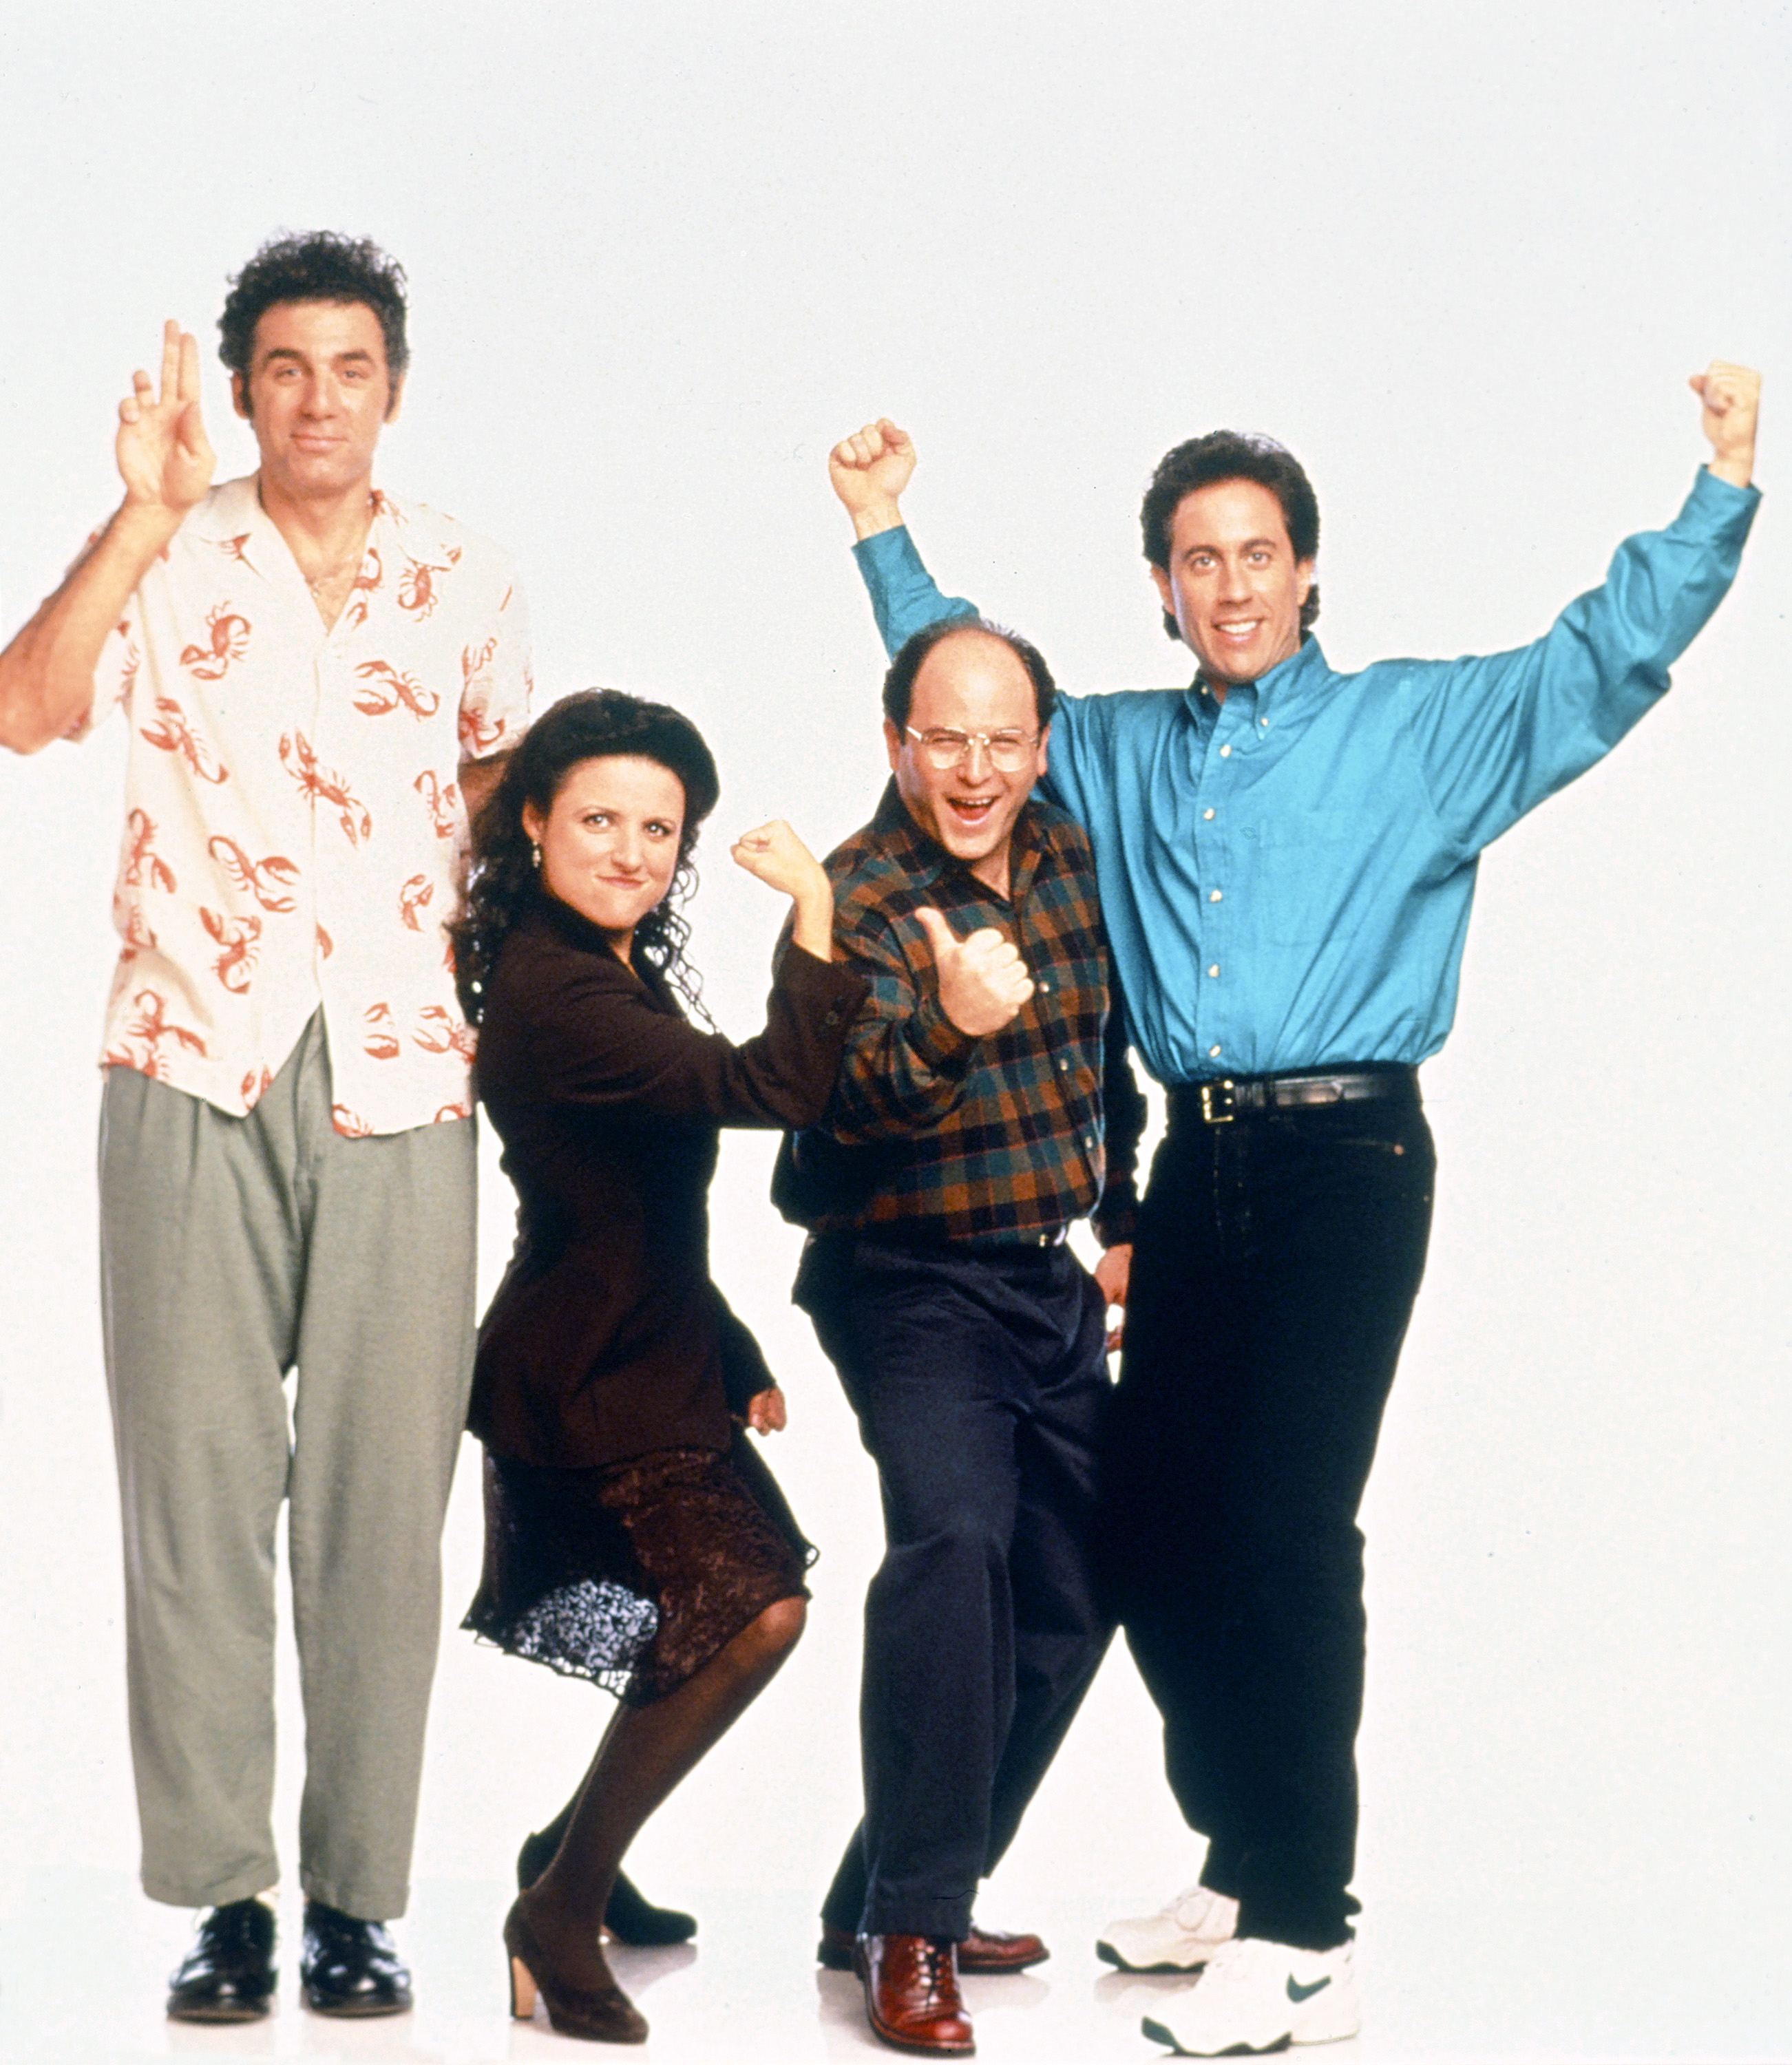 'Seinfeld' Episodes Being Used to Teach Psychiatric Disorders at